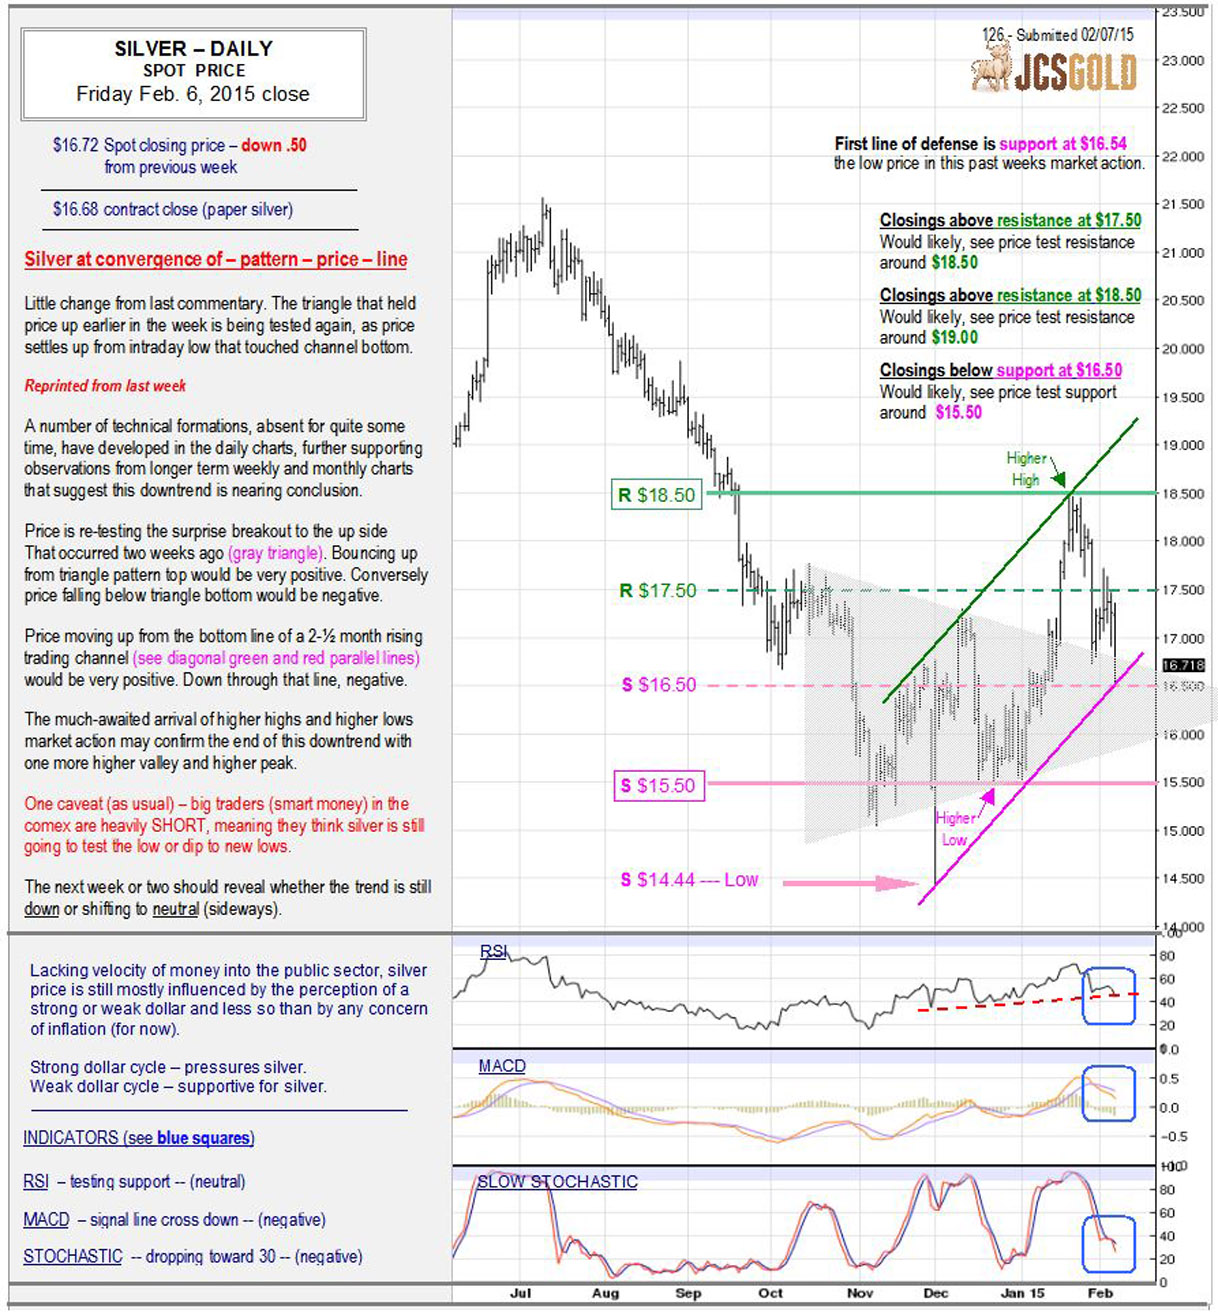 Feb 6, 2015 chart & commentary